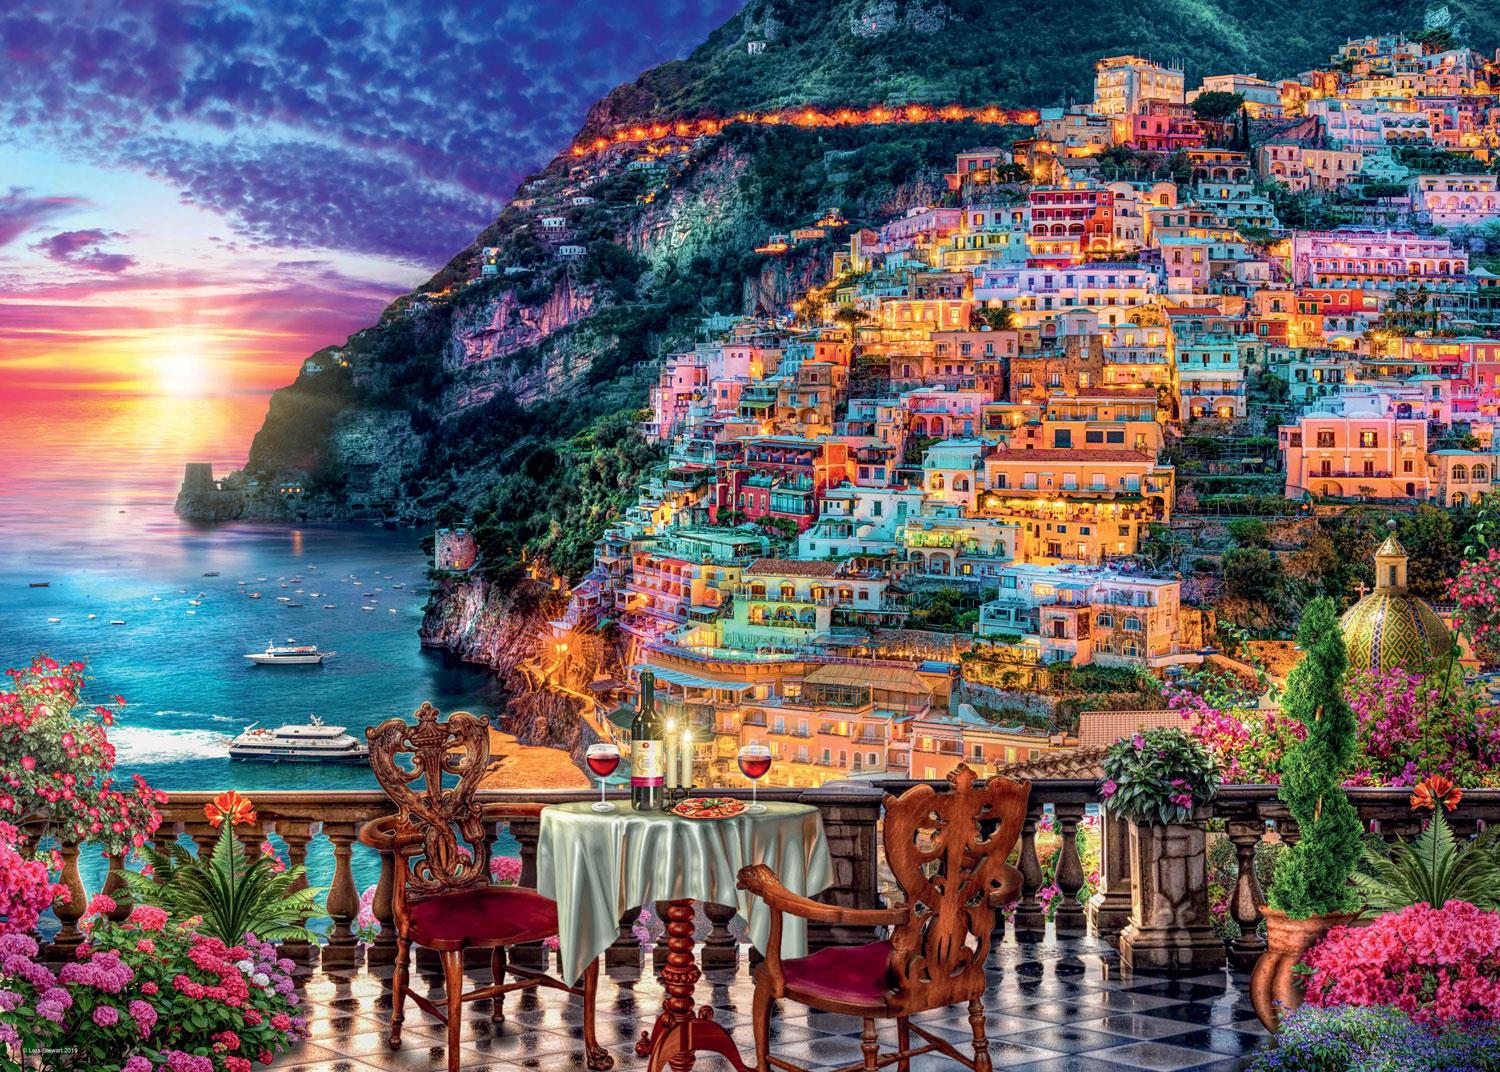 Ravensburger Dinner in Positano Italy Jigsaw Puzzle (1000 Pieces)